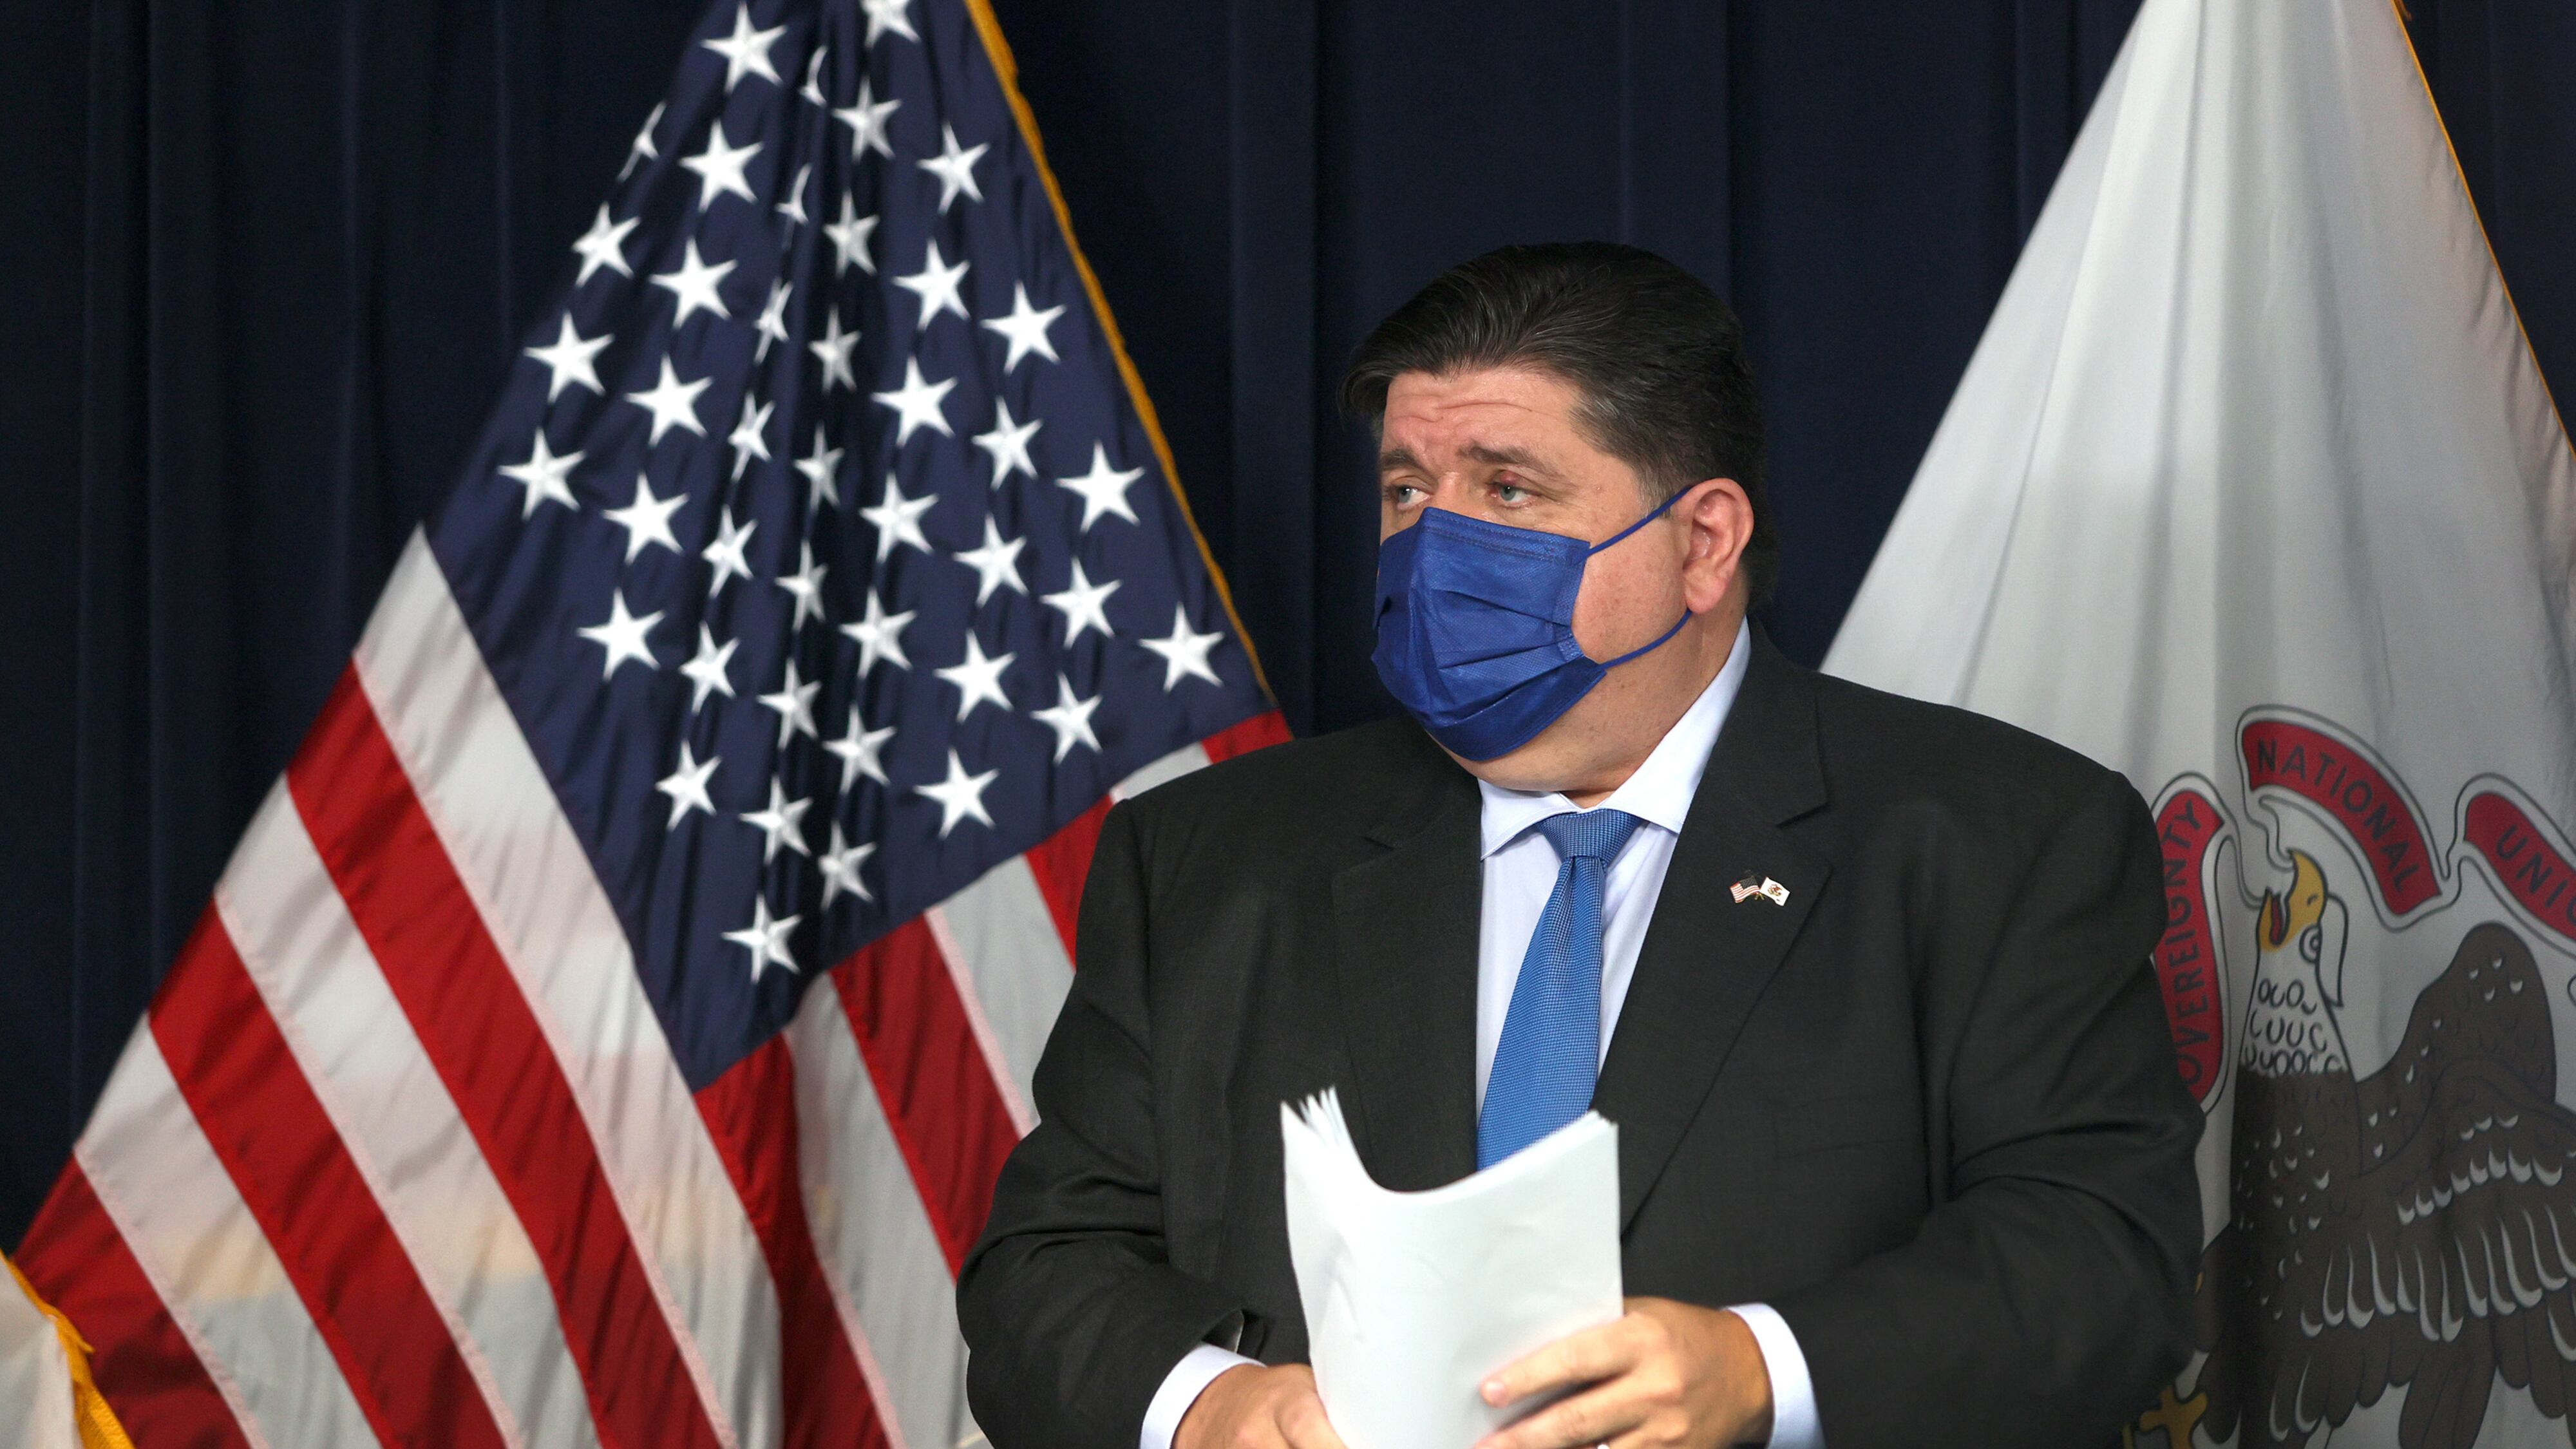 Governor J.B. Pritzker holds papers and stands on a stage in front of the United States flag, wearing a blue mask.